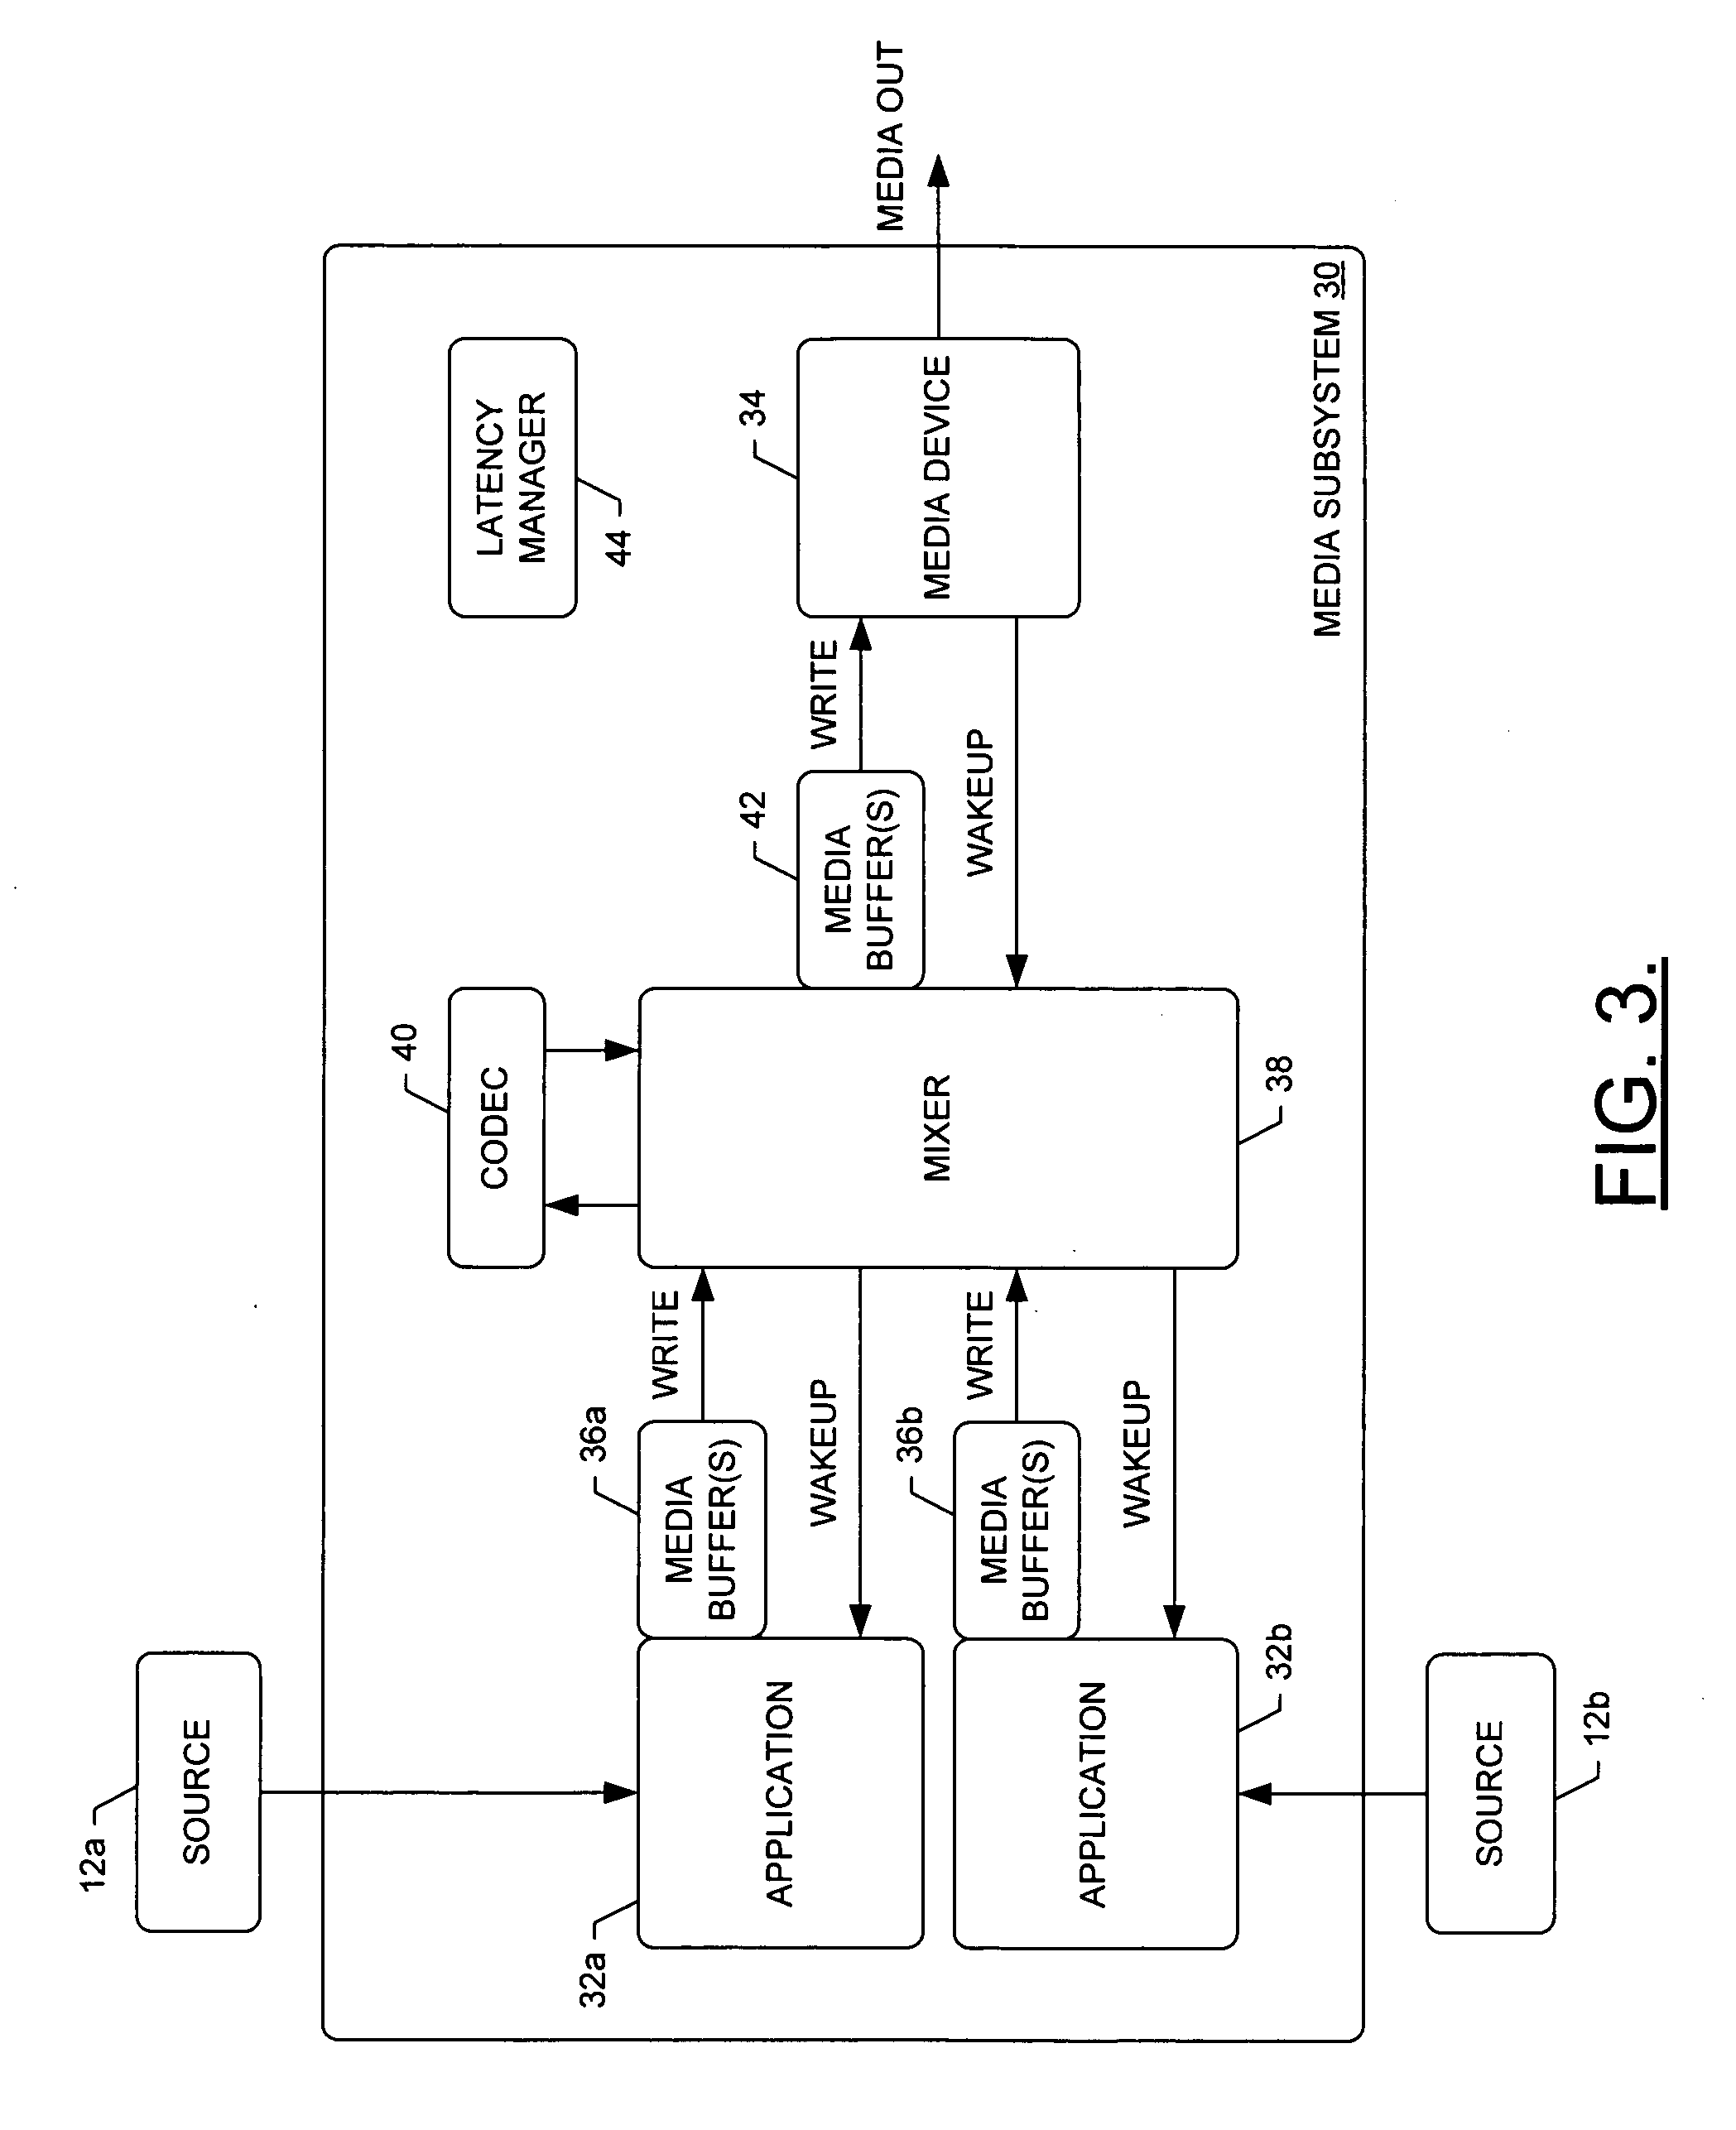 Media subsystem, method and computer program product for adaptive media buffering